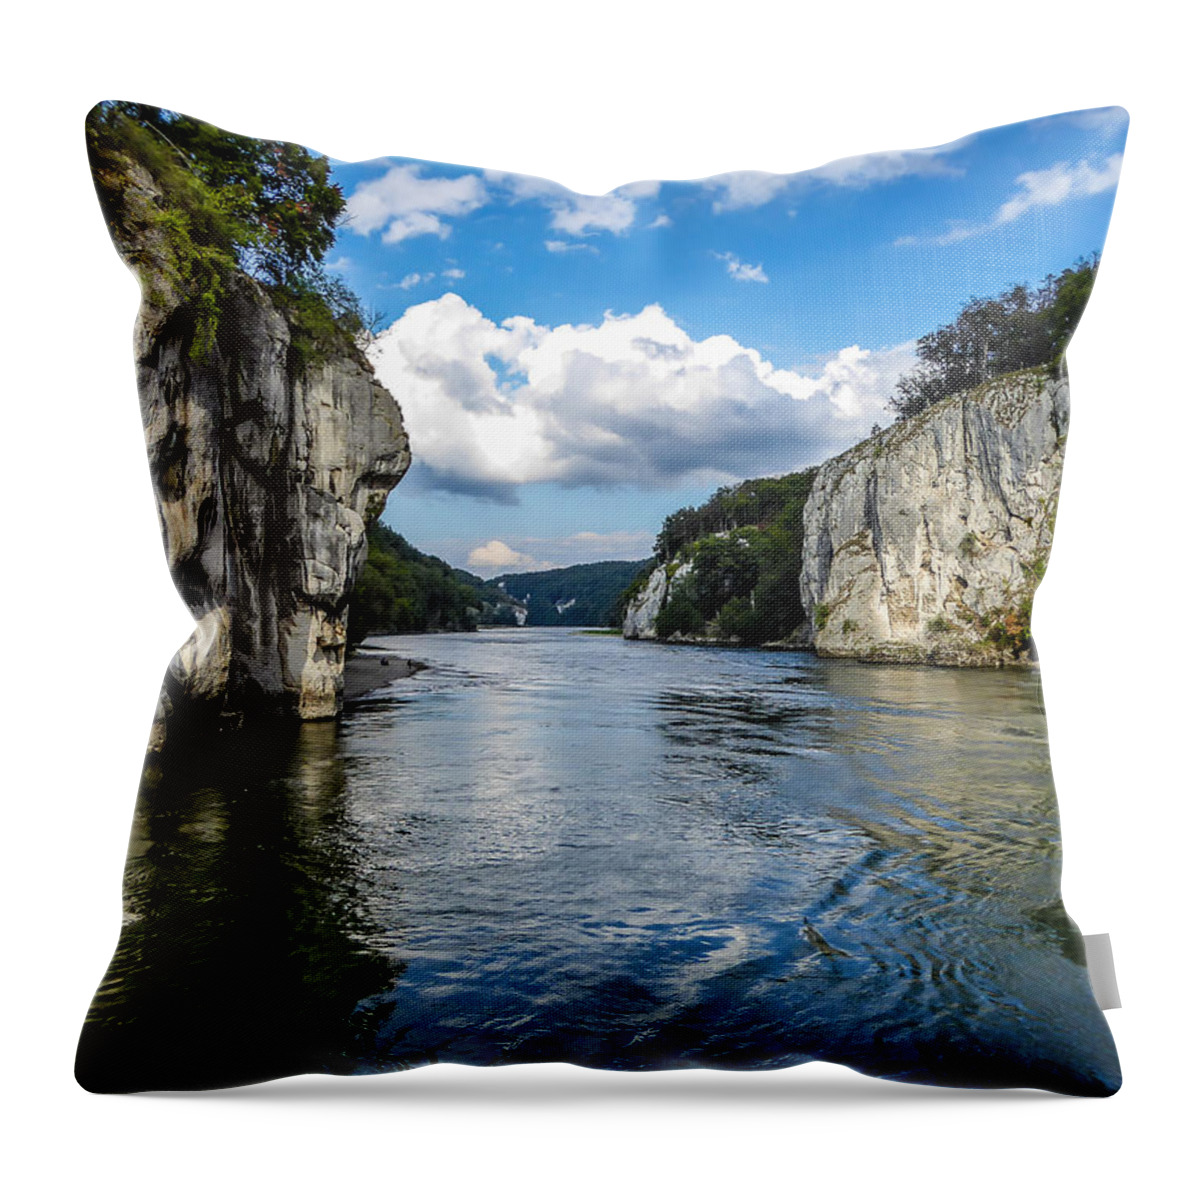 Danube Throw Pillow featuring the photograph Danube Gorge by Pamela Newcomb